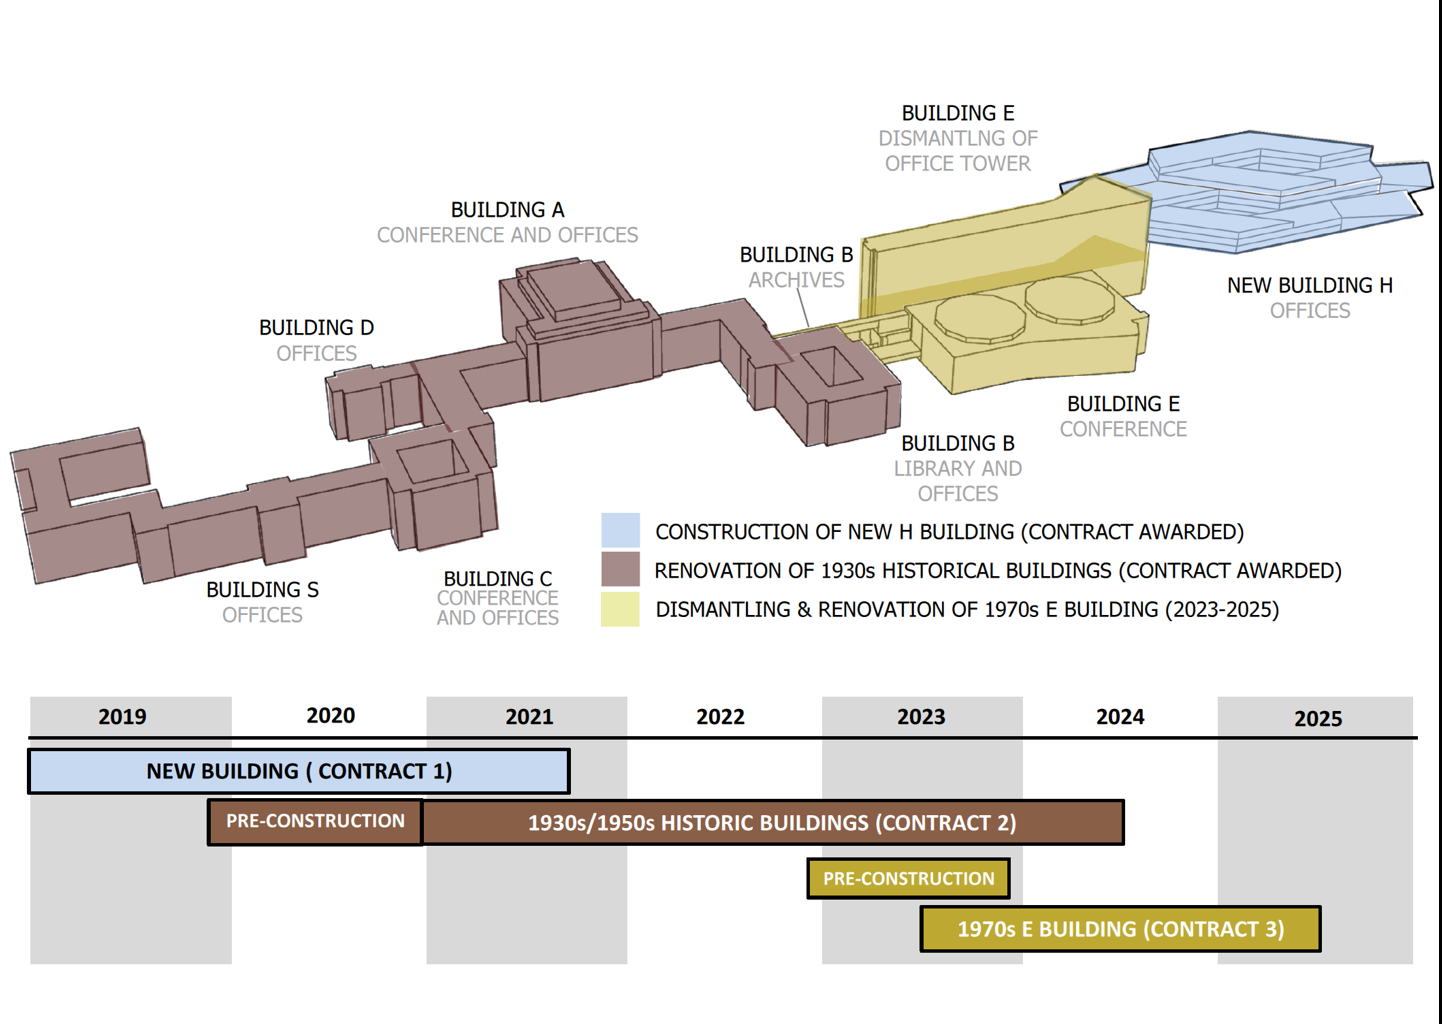 The graphic gives an overview of the different contracts awarded for the different buildings in the Palais des Nations.